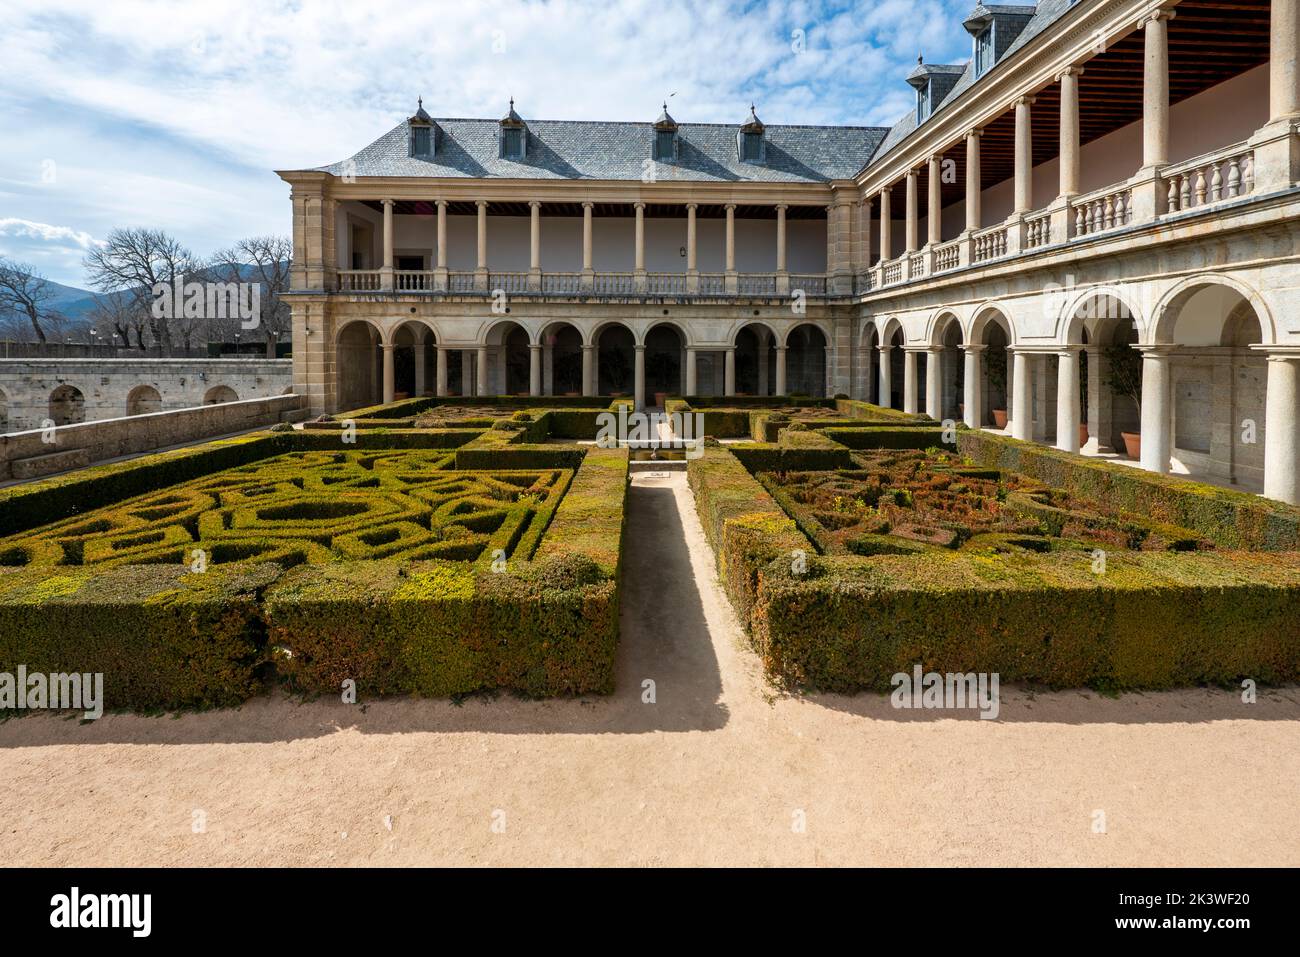 Gardens with hedges in an interior wing of the Escorial Monastery Stock Photo